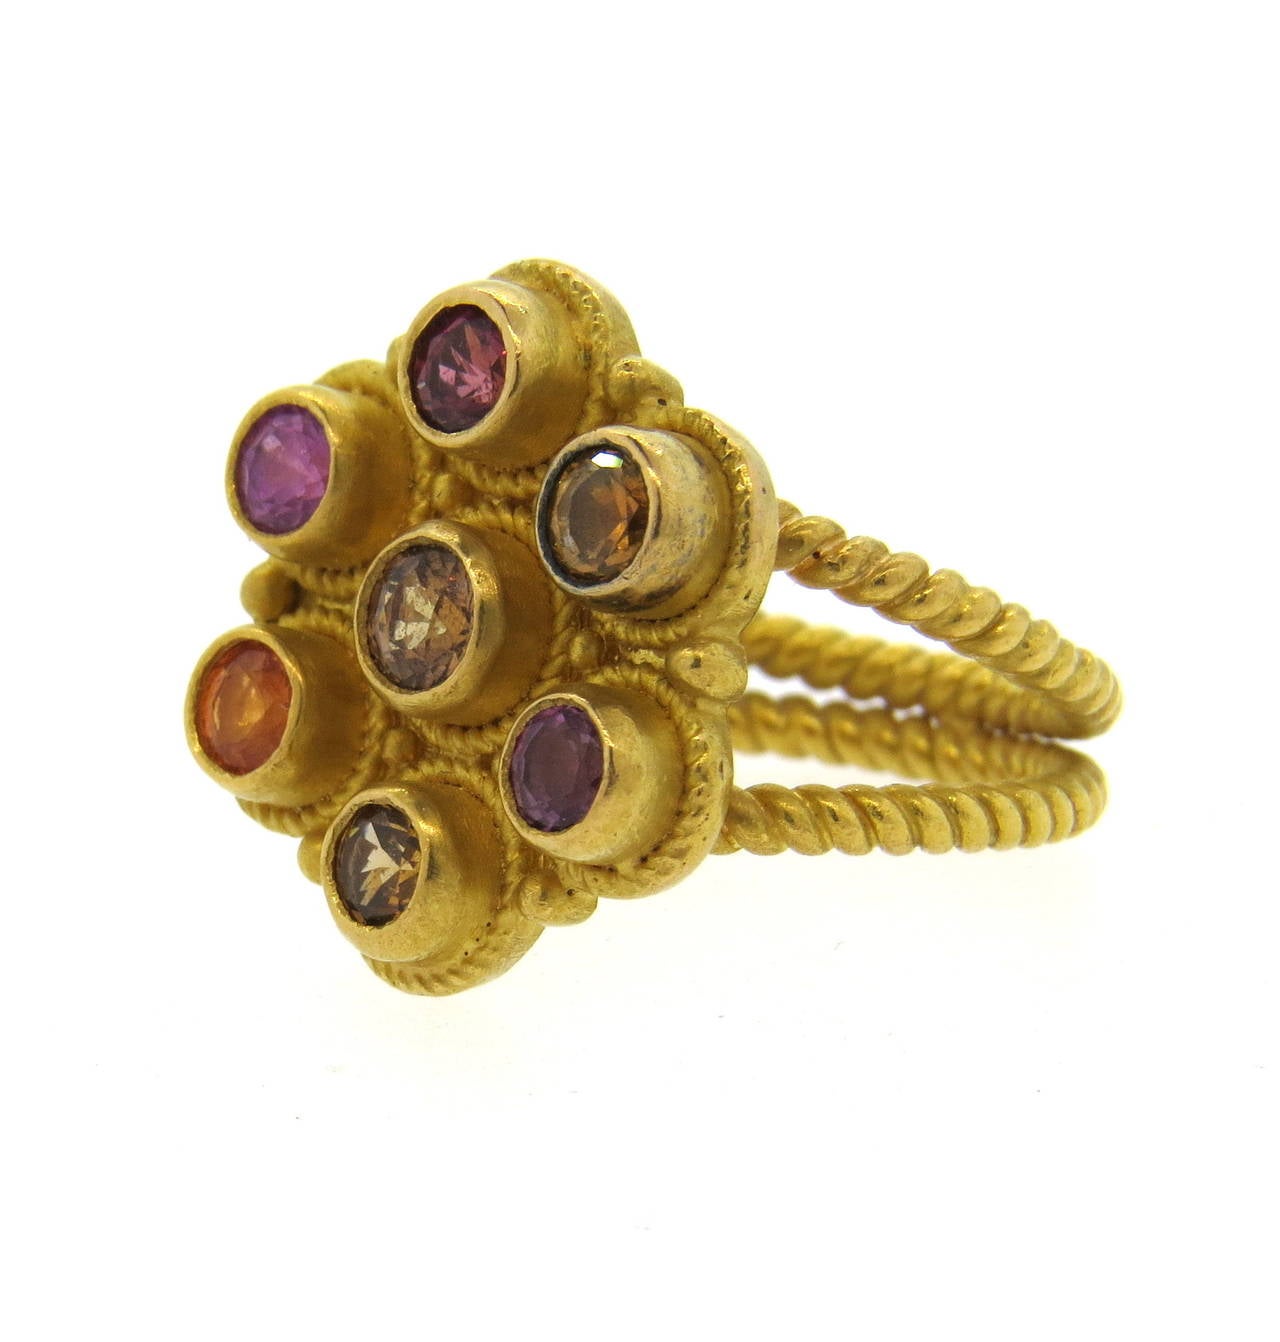 Reinstein Ross ring, crafted in 22k gold, featuring multicolor gemstones. Ring is a size 6, ring top is 19mm x 17mm. Marked R/R and 22k. Weight of the piece - 12.7 grams